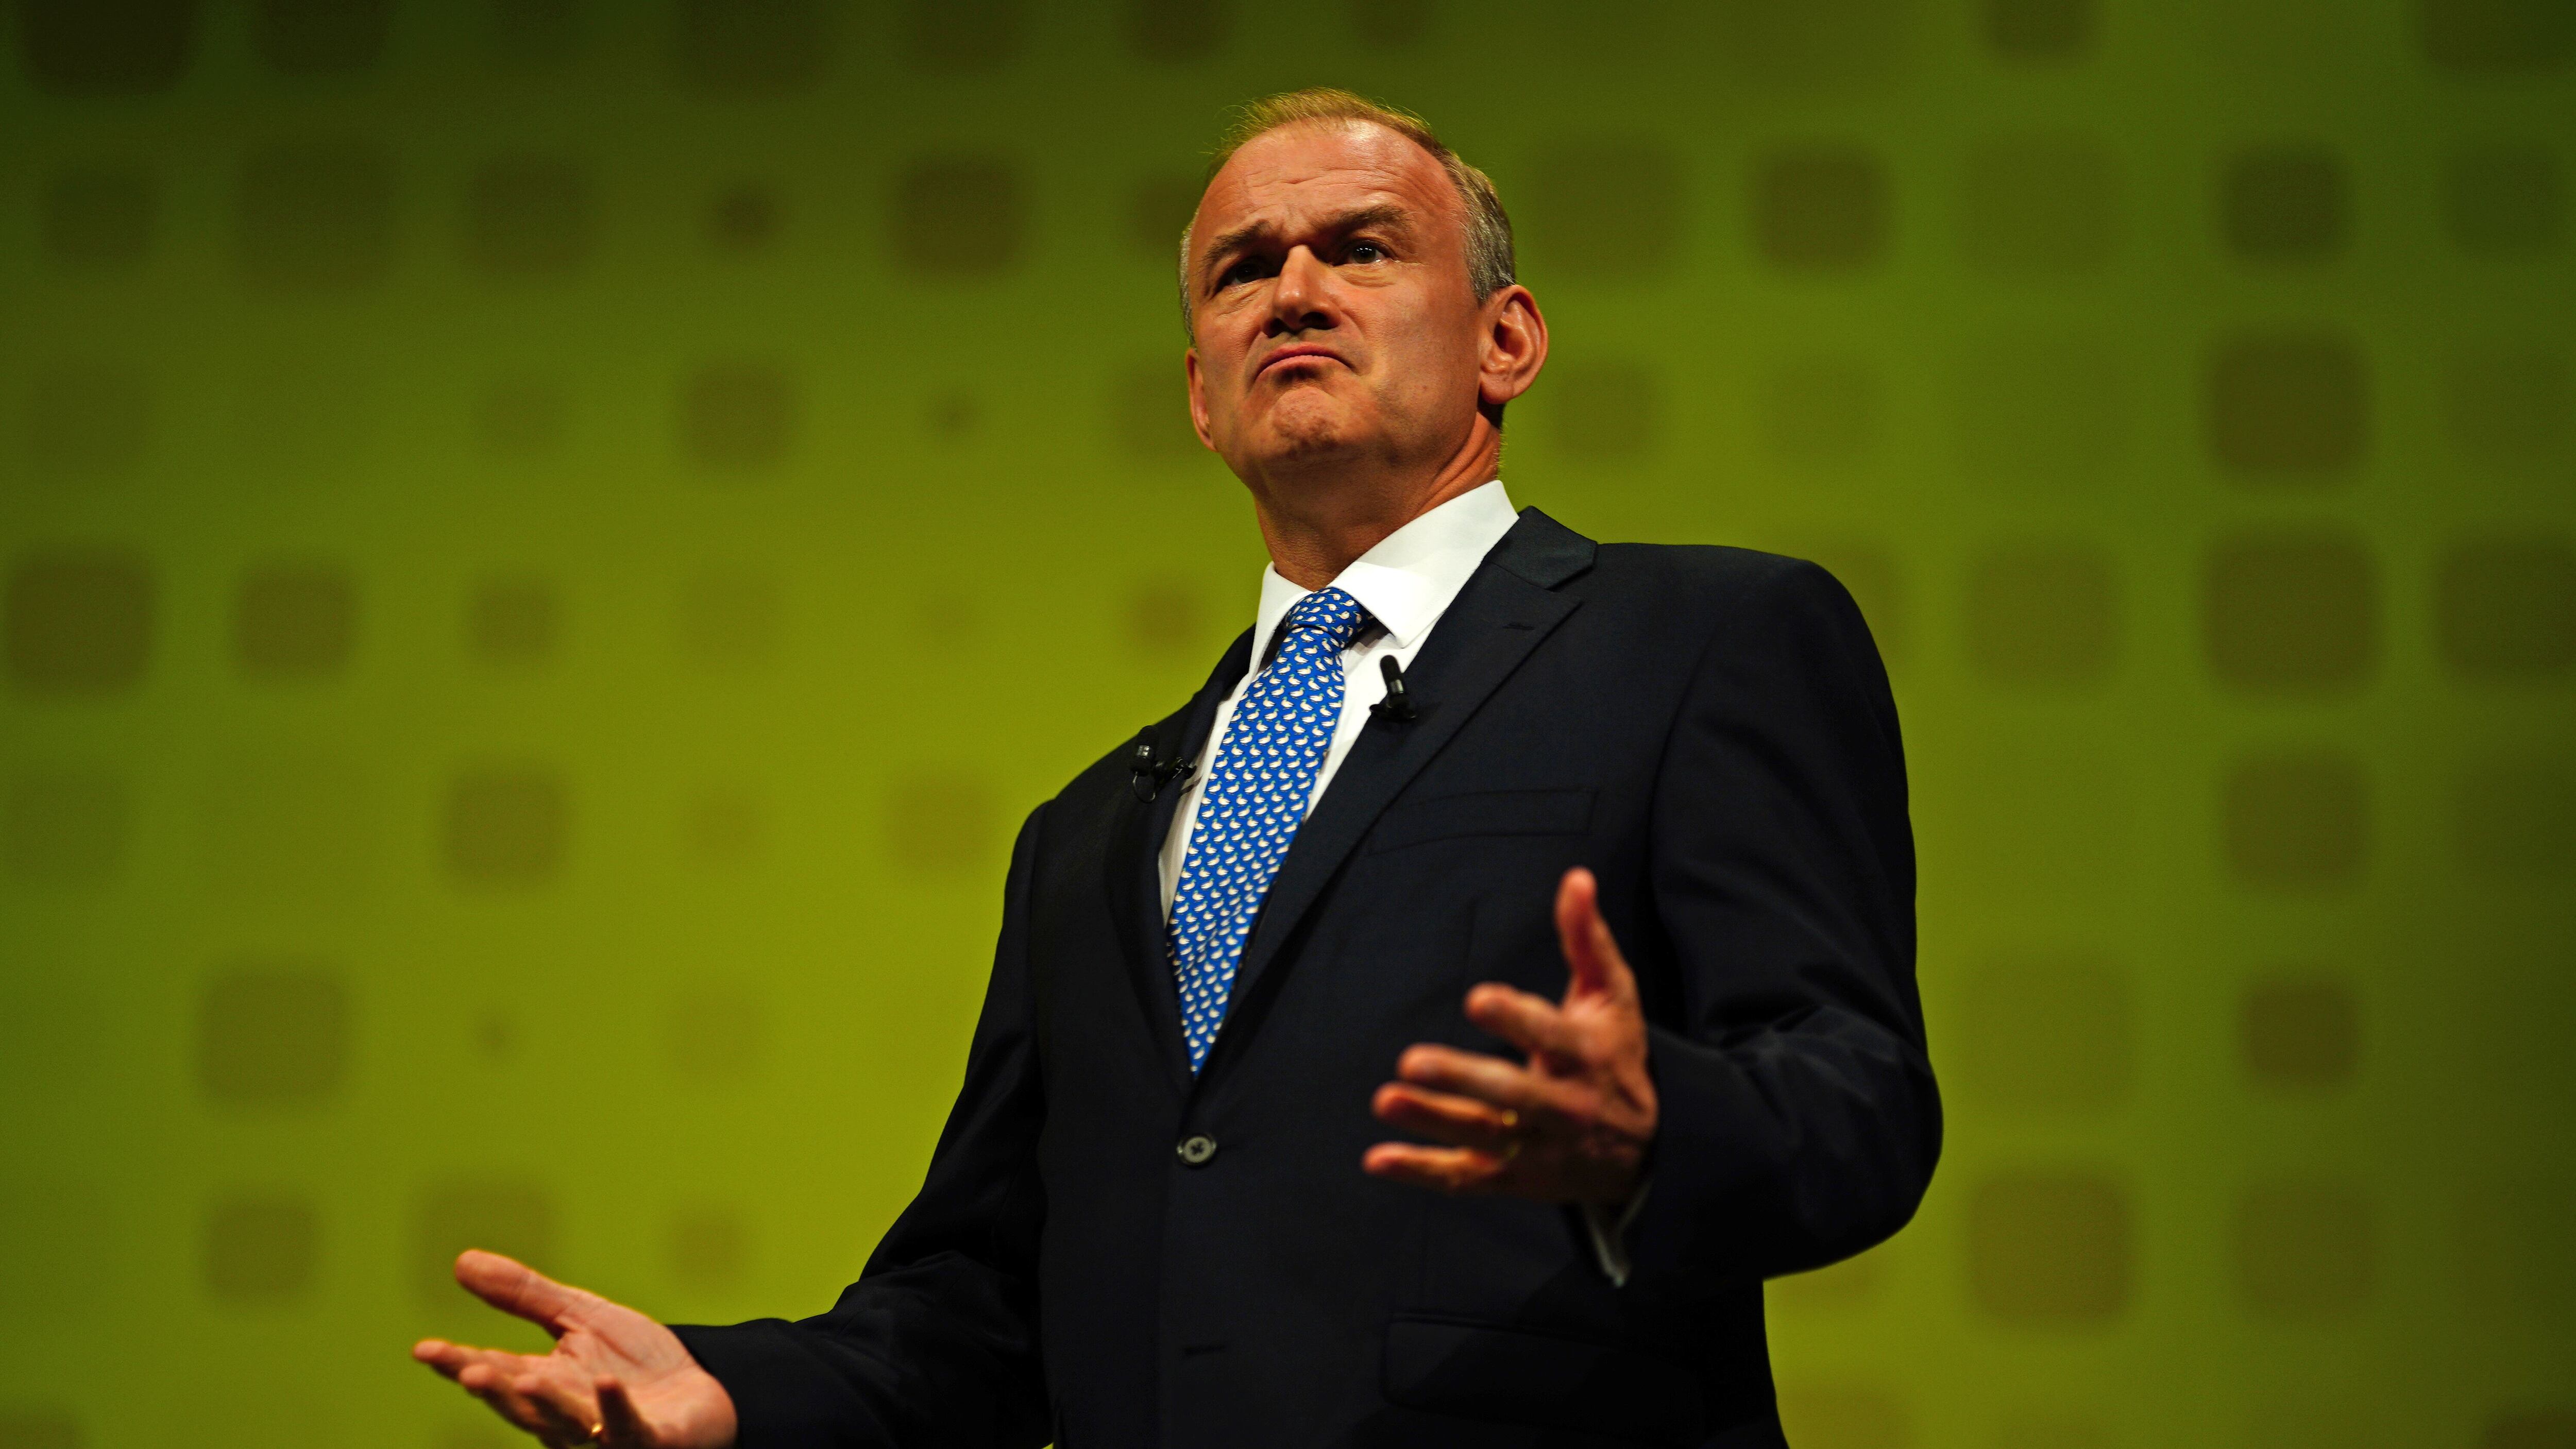 Liberal Democrat leader Sir Ed Davey has called for a ceasefire in Gaza (Ben Birchall/PA)